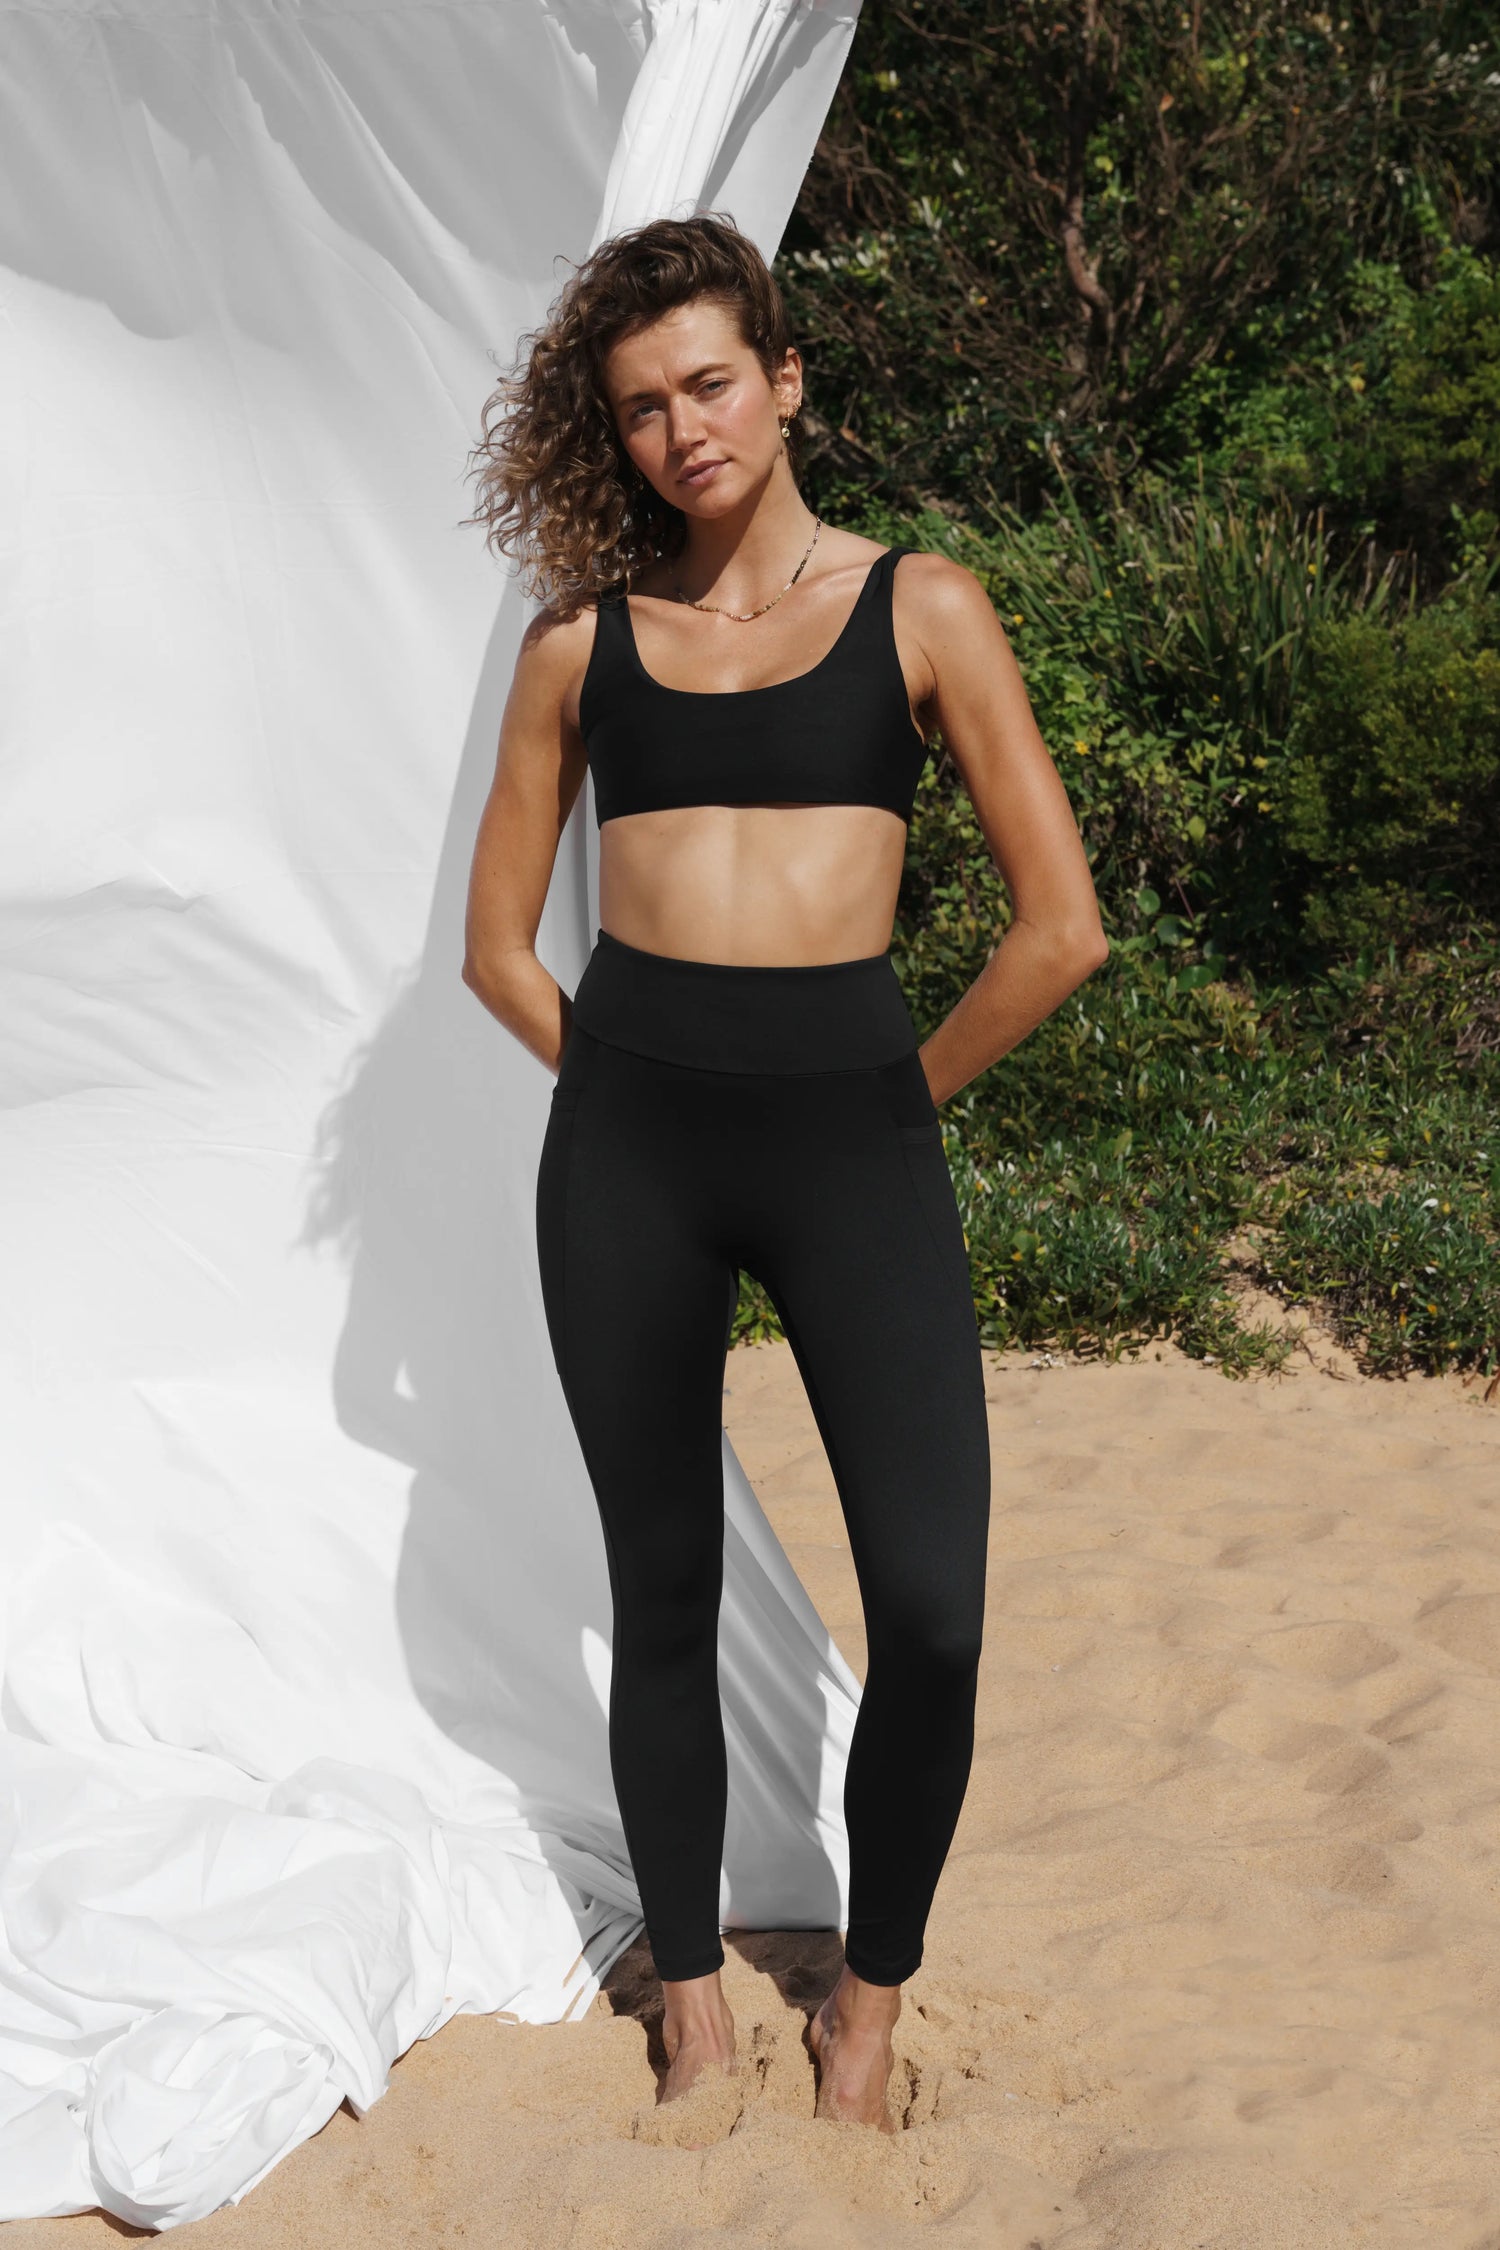 Our model at the beach, facing the front wearing a black Allawah legging and Lowanna Swim top